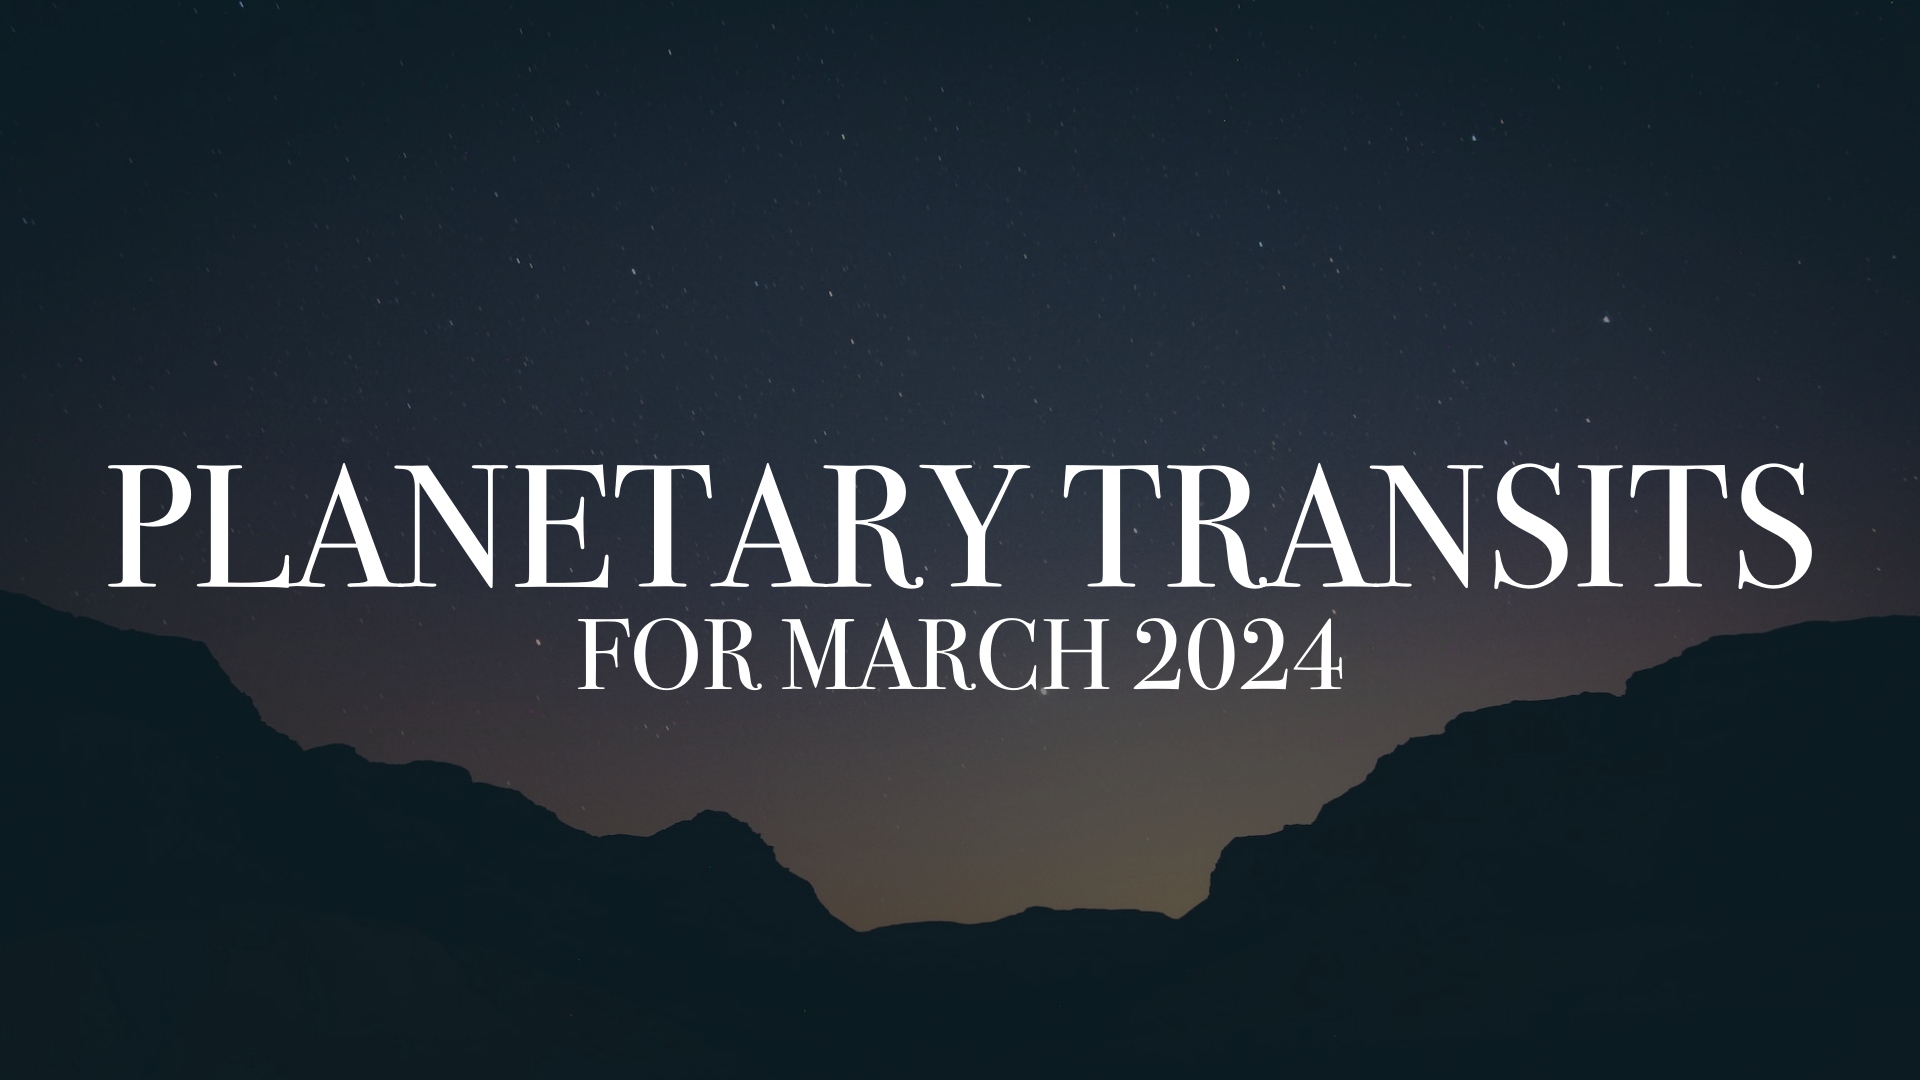 PLANETARY TRANSITS for march 2024